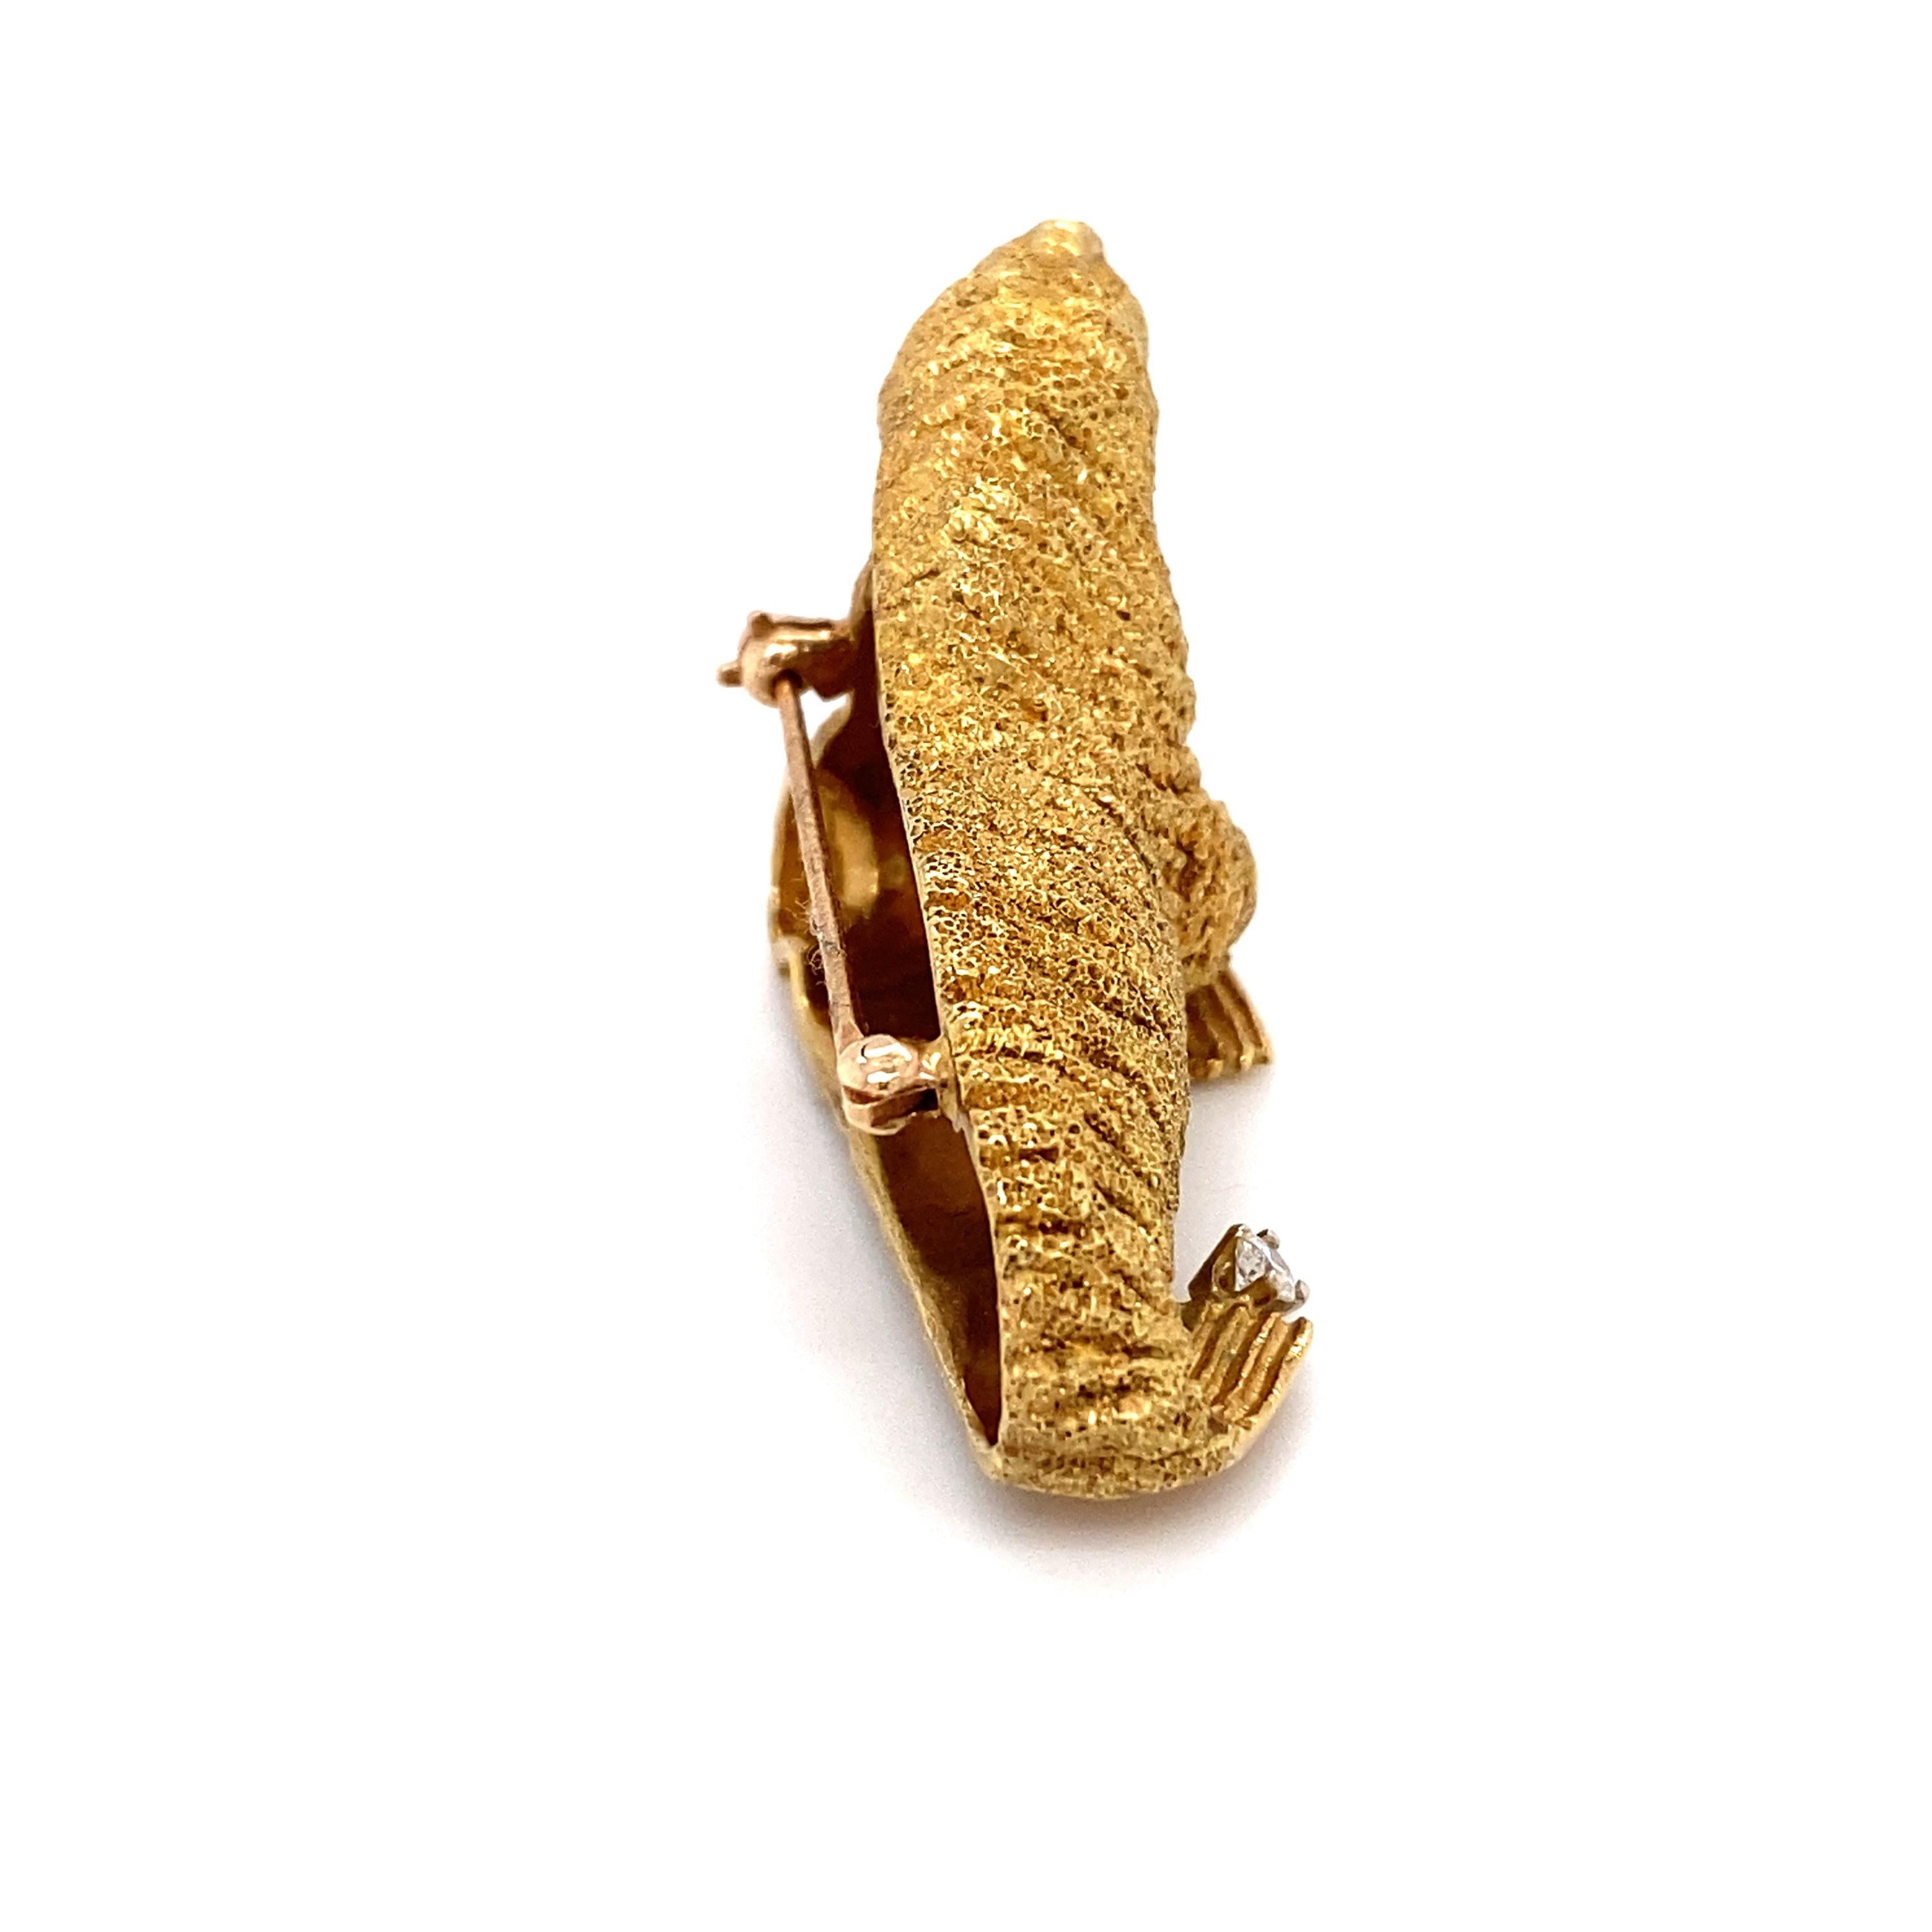 Item Details: This whimsical brooch by Tiffany & Co. is masterfully crafted in 18 karat yellow gold. 
It features an accent diamond and rubies for eyes.

Circa: 1960s
Metal Type: 18 Karat Yellow Gold
Weight: 24.4 grams
Dimensions: 1.5 inch